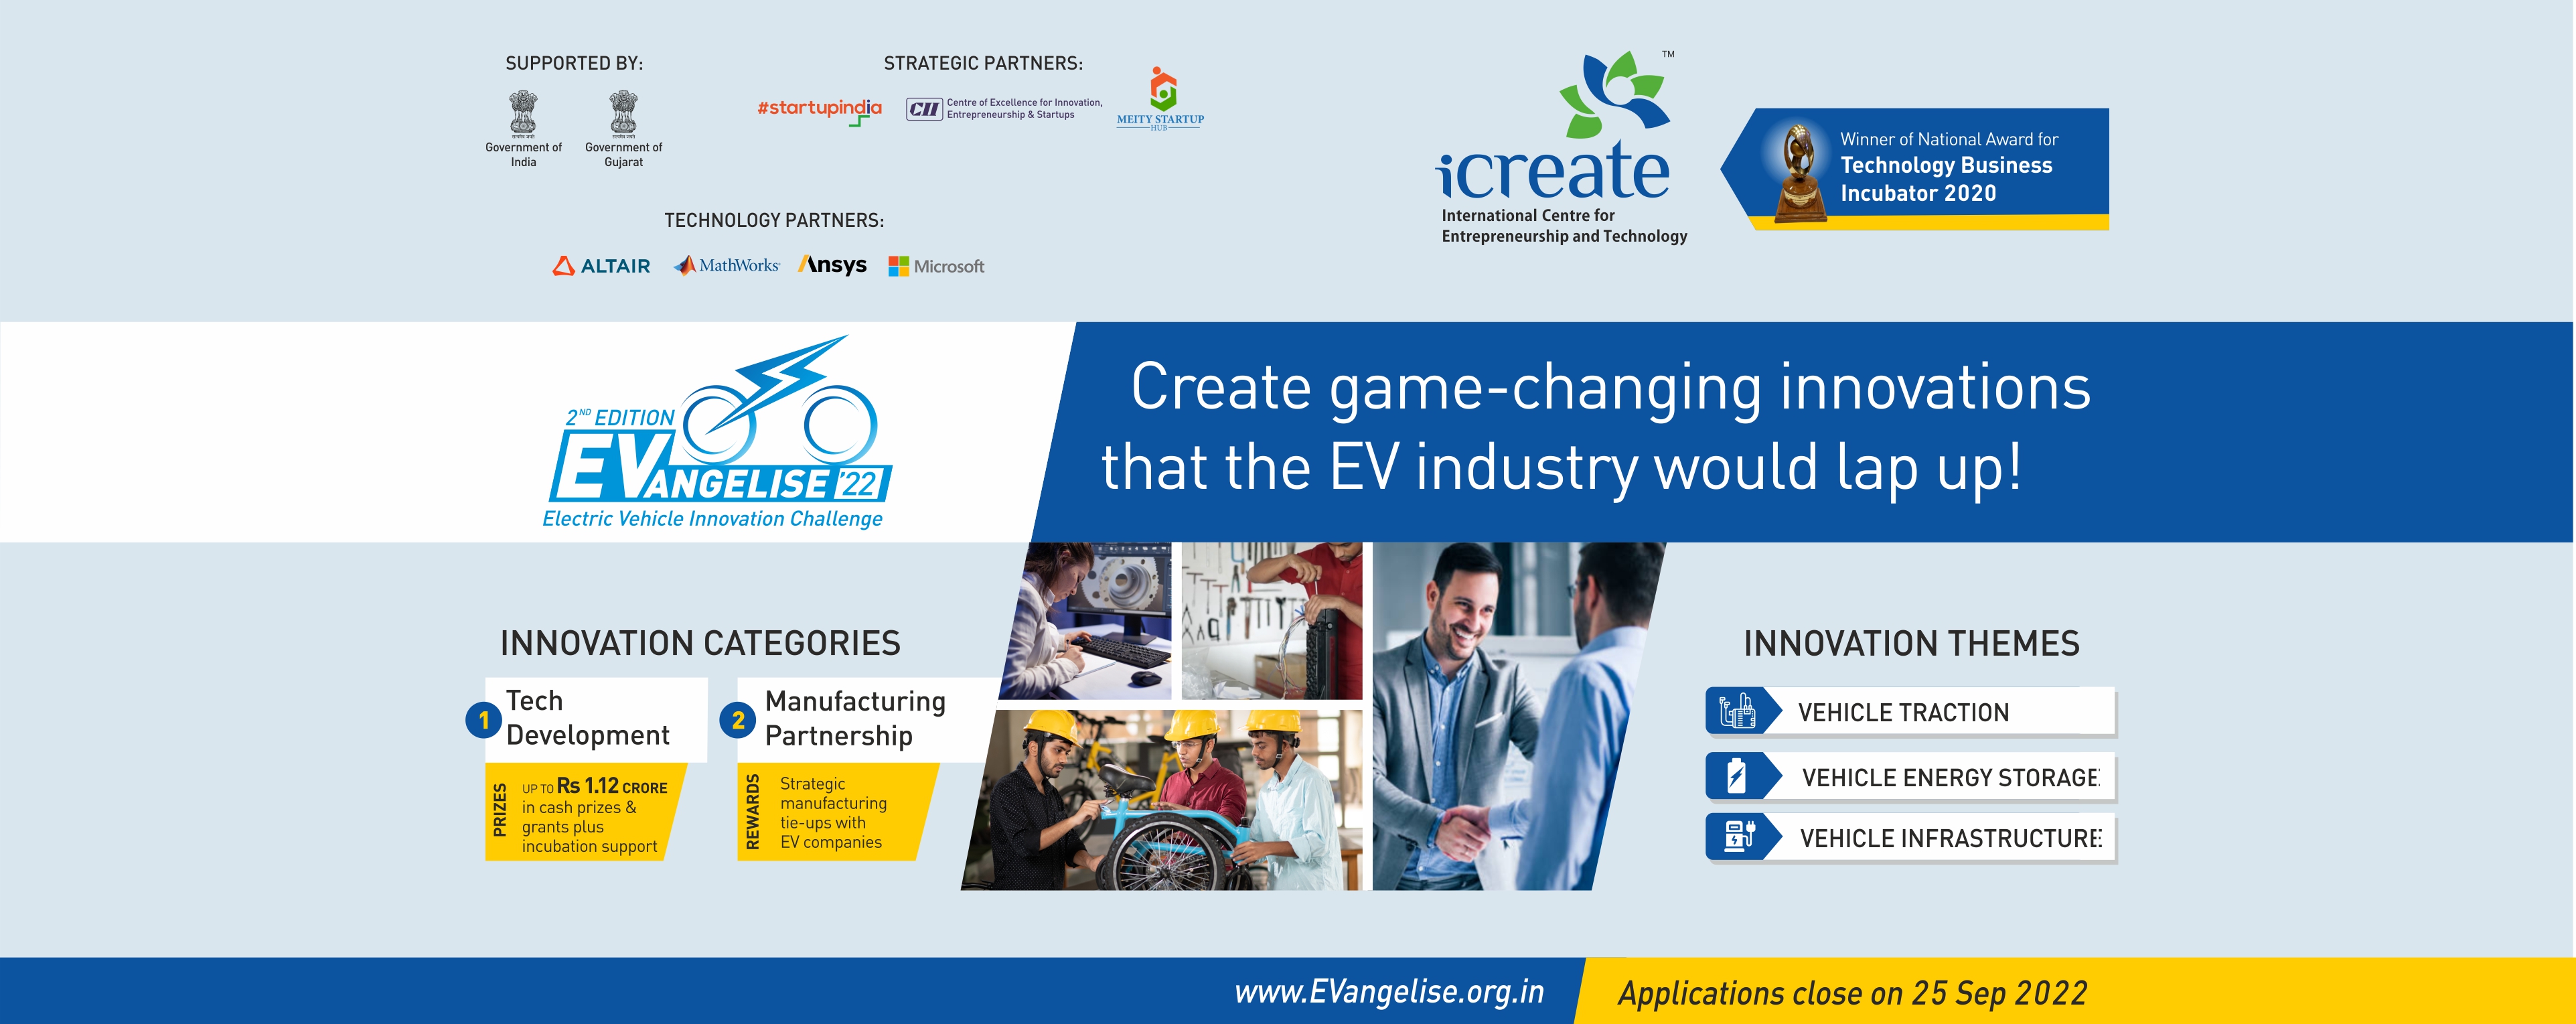 iCreate-Best-Incubator-in-India-Home-Page-Banner-01